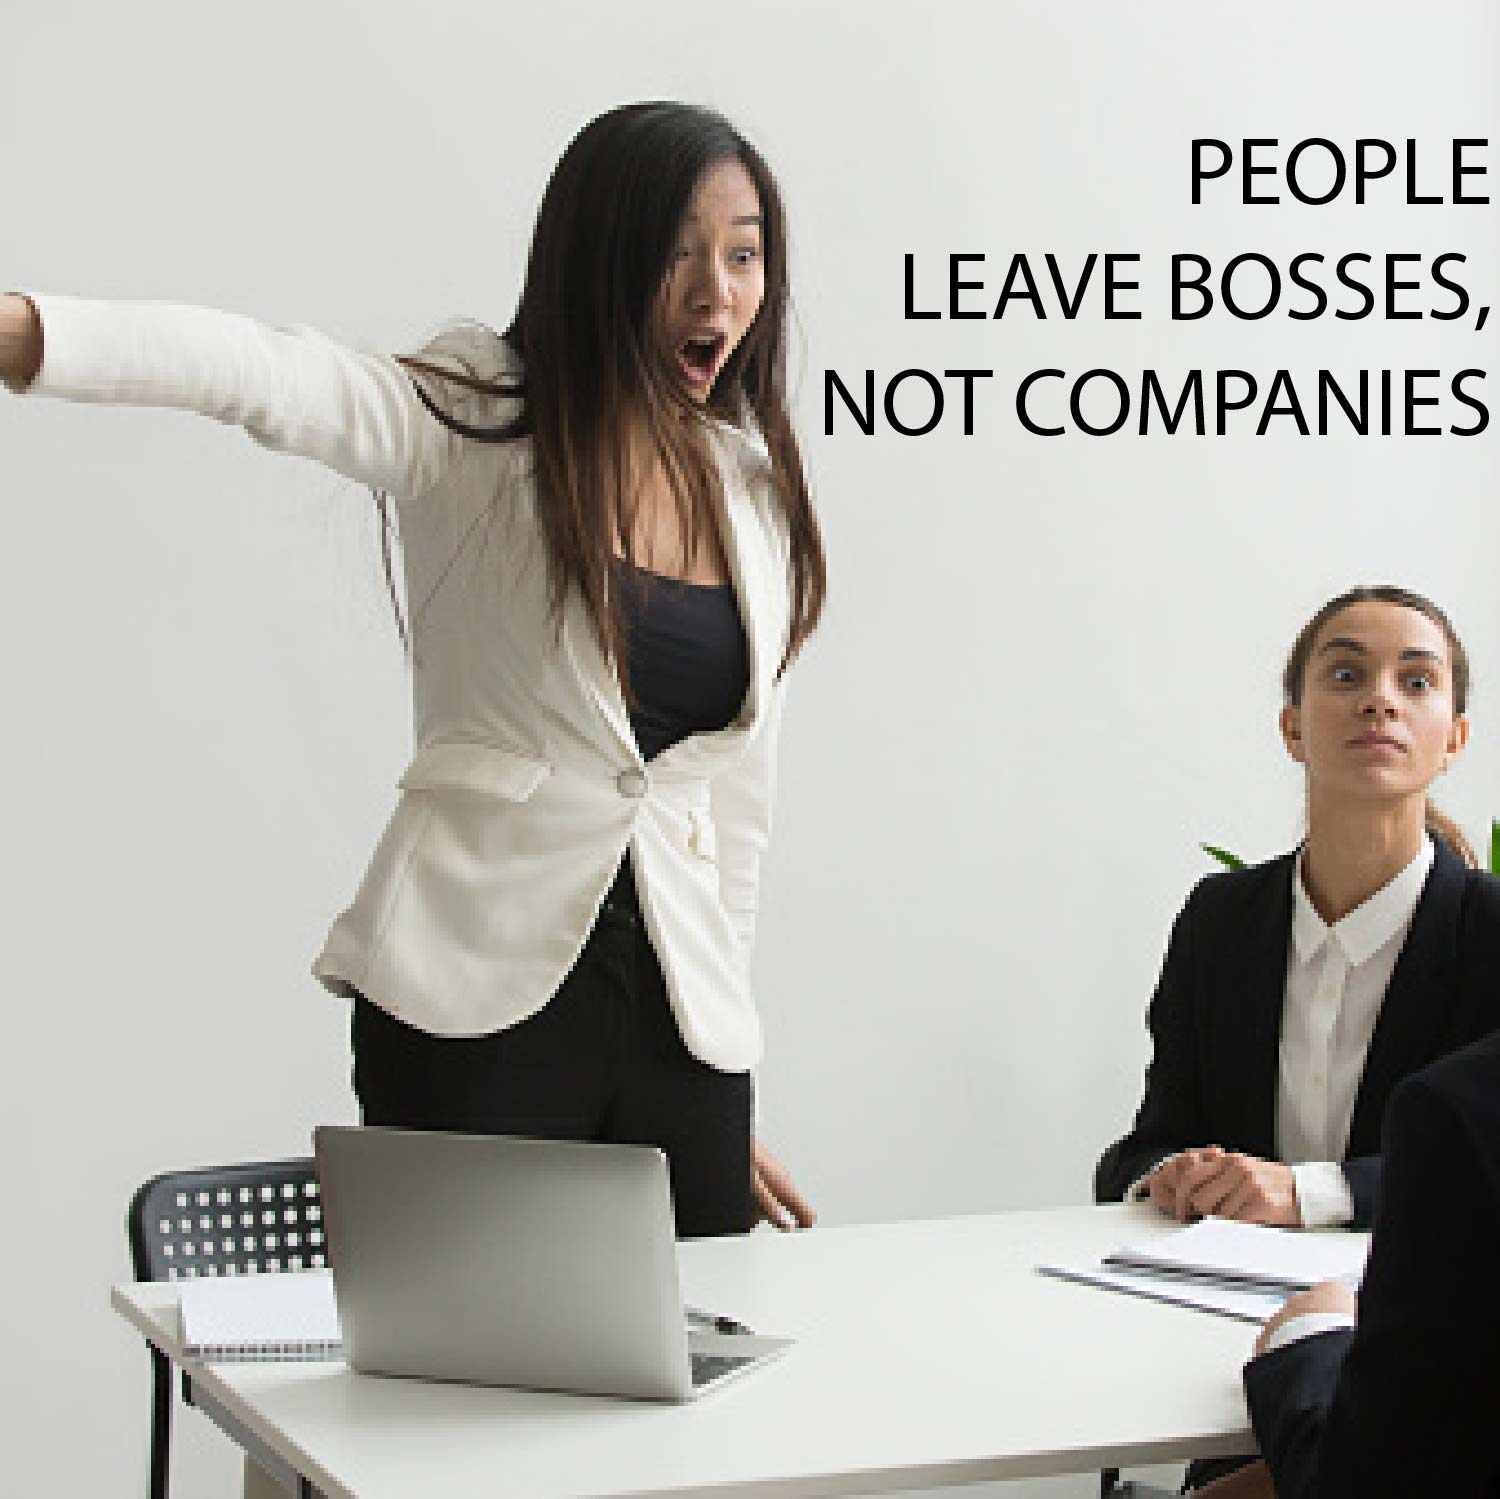 Photo of female in a business setting yelling and pointing towards the door. Text: "PEOPLE LEAVE BOSSES, NOT COMPANIES"